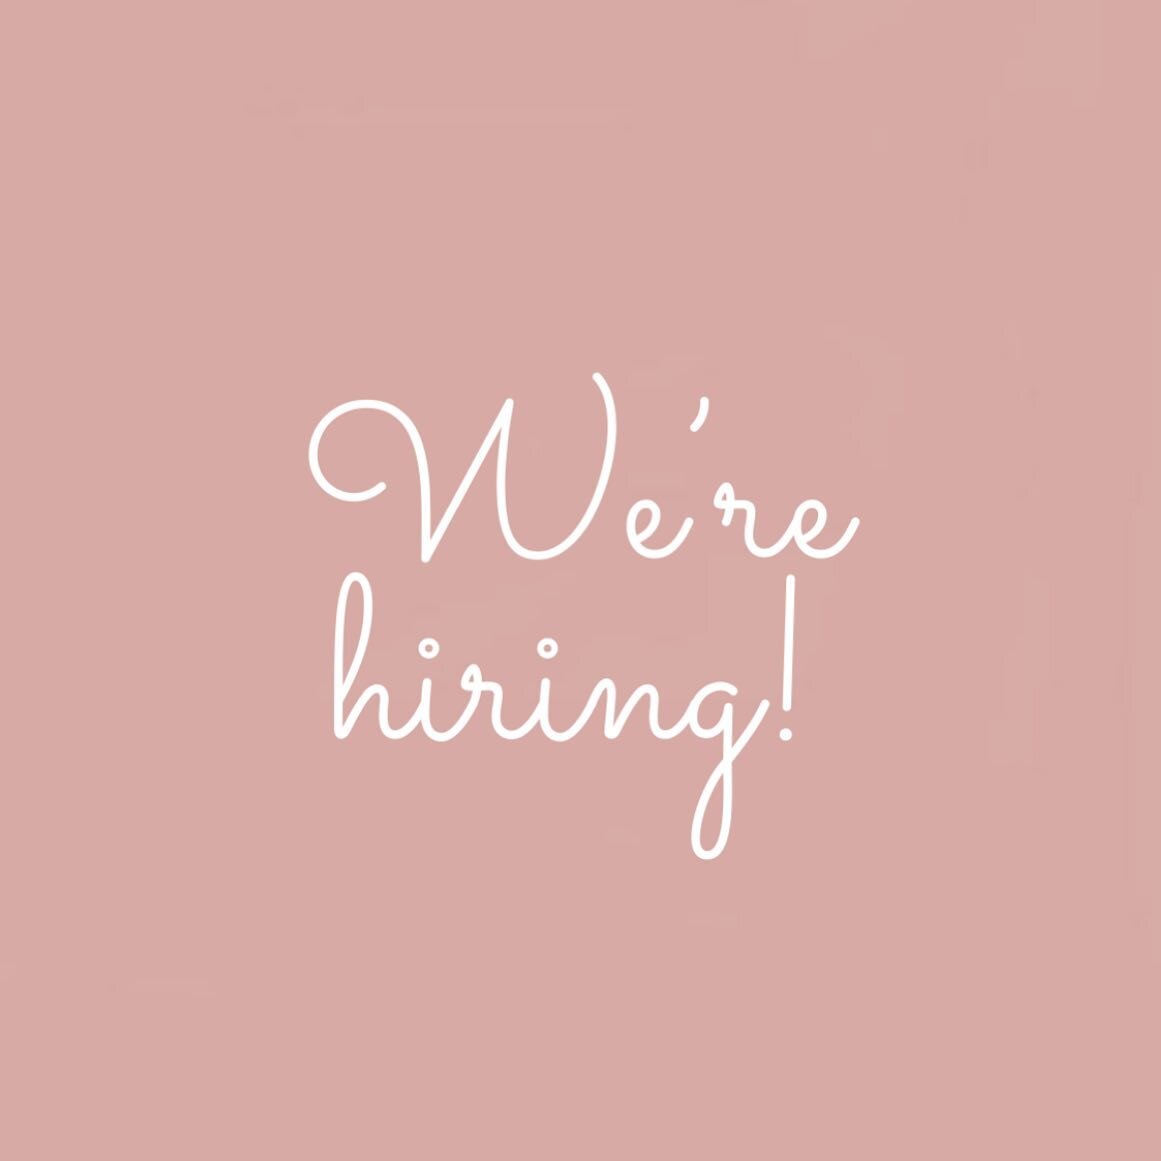 We&rsquo;re getting ready to (hopefully) open soon and we&rsquo;re looking to start training someone to join our team! If you&rsquo;re outgoing, responsible and hard working we&rsquo;d love to hear from you! Send your resume to info@luxetanning.ca 🤍